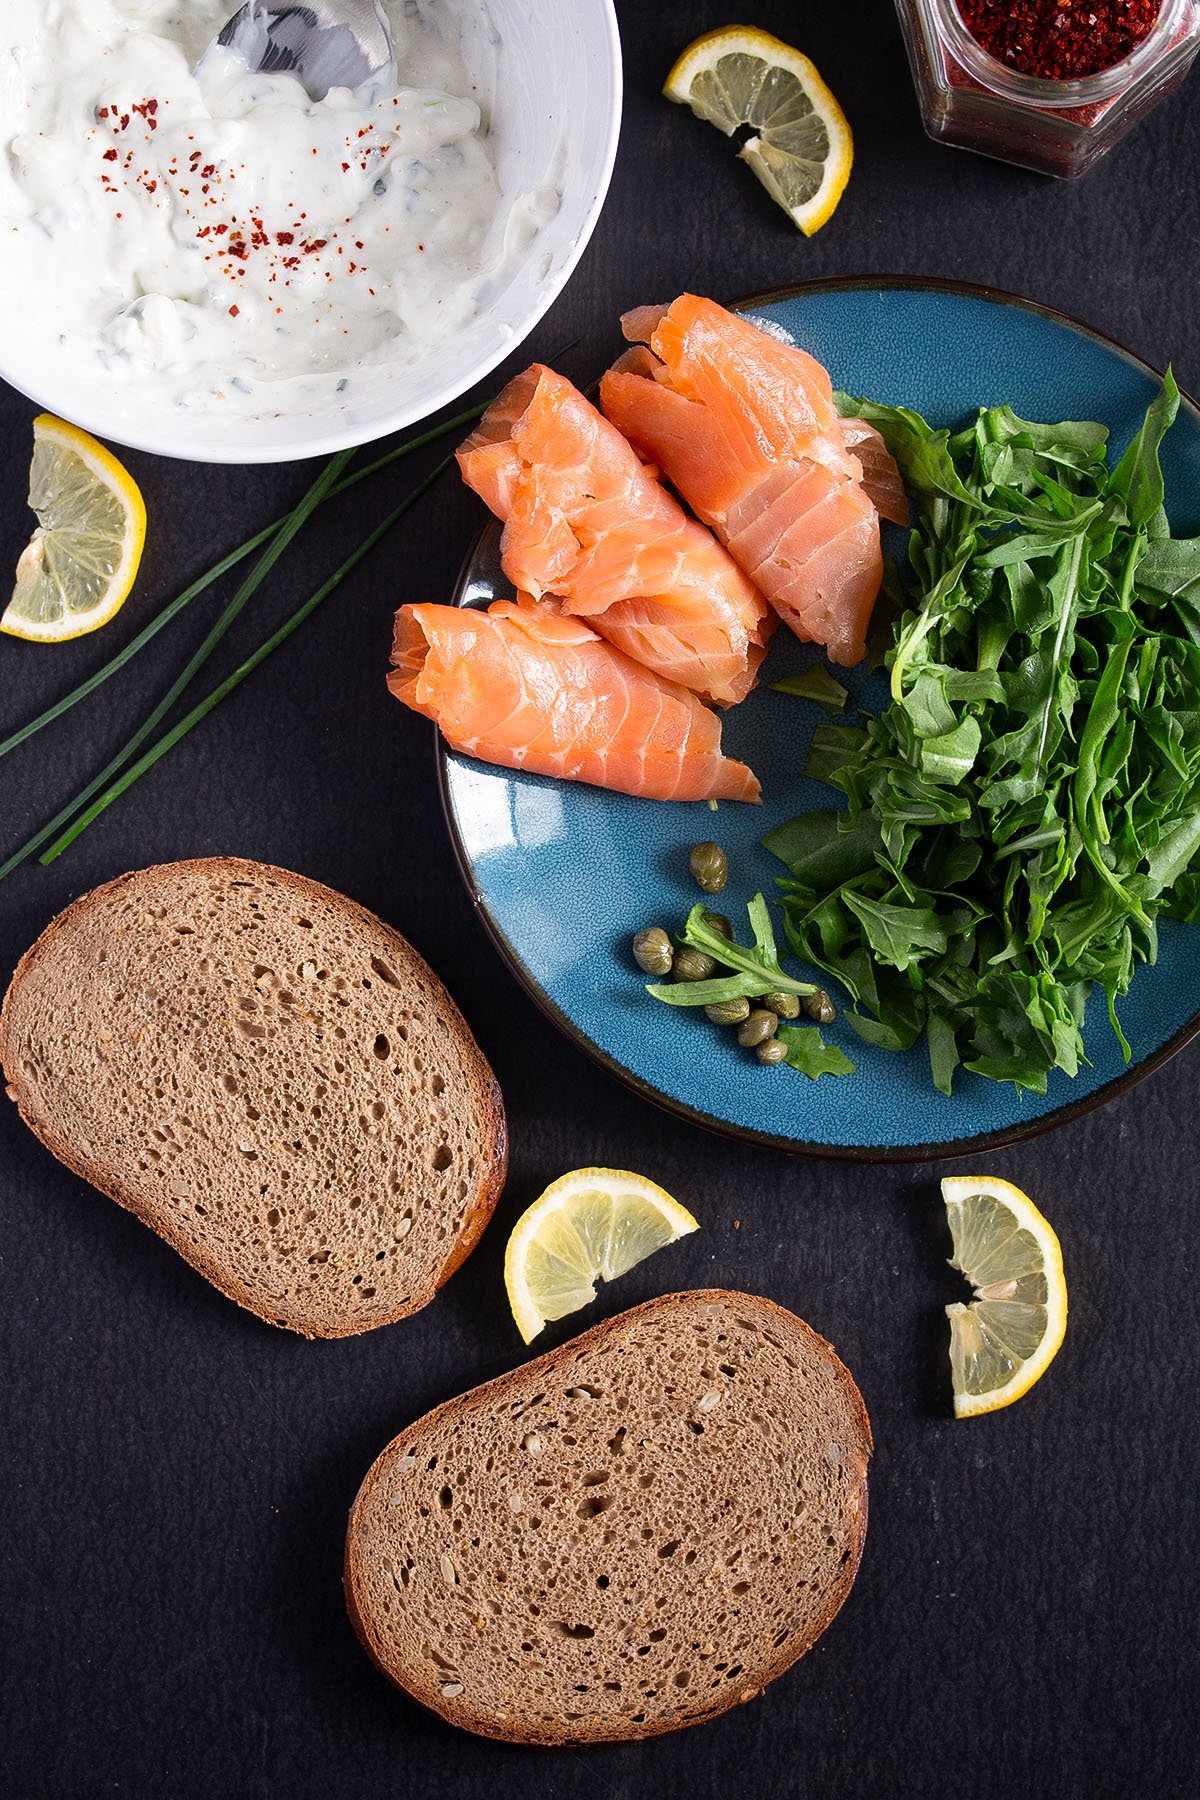 ingredients for sandwich with salmon, arugula, bread, cream cheese and capers.